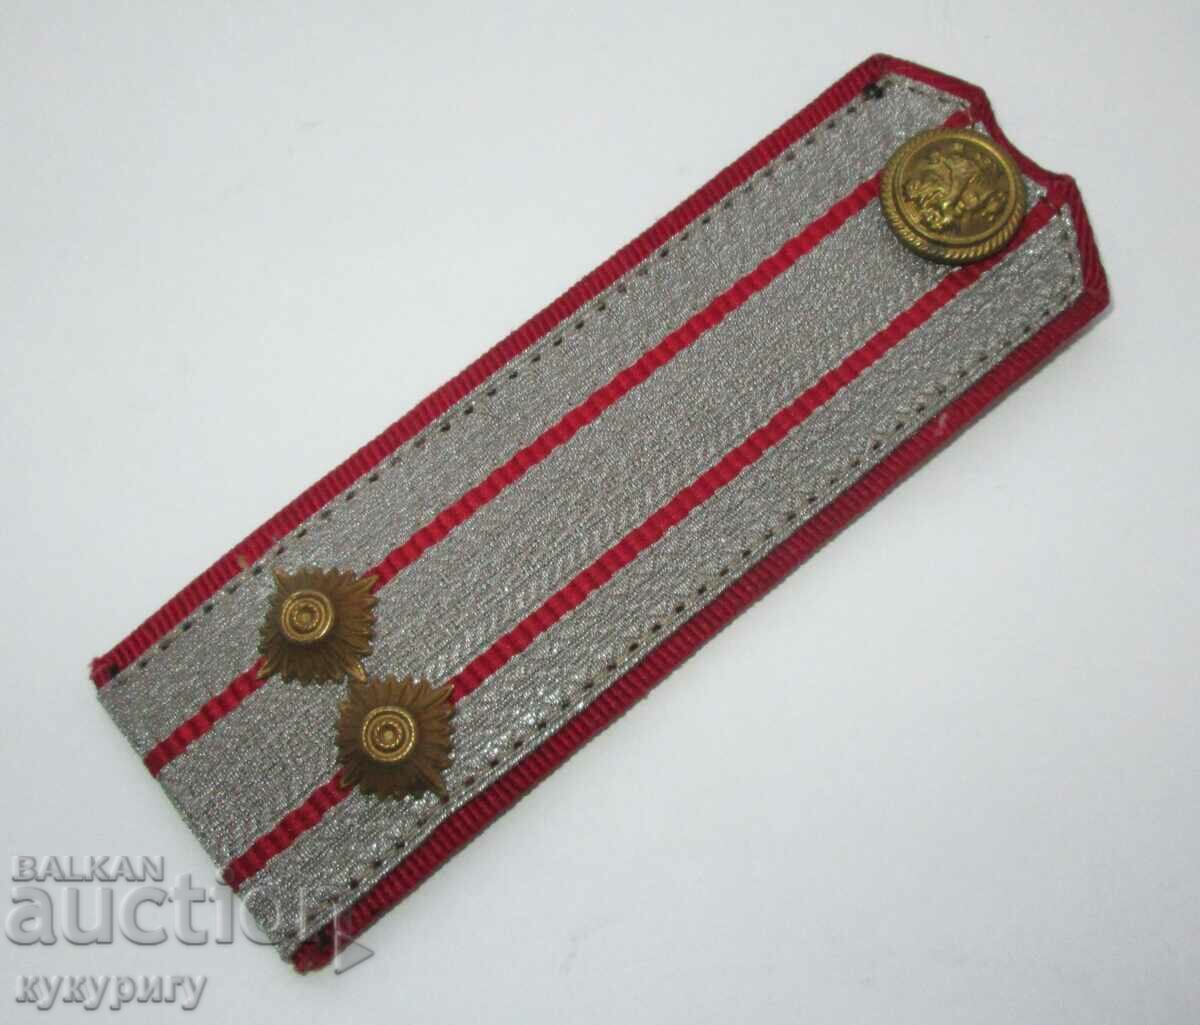 Old Royal epaulettes of the WWII military uniform